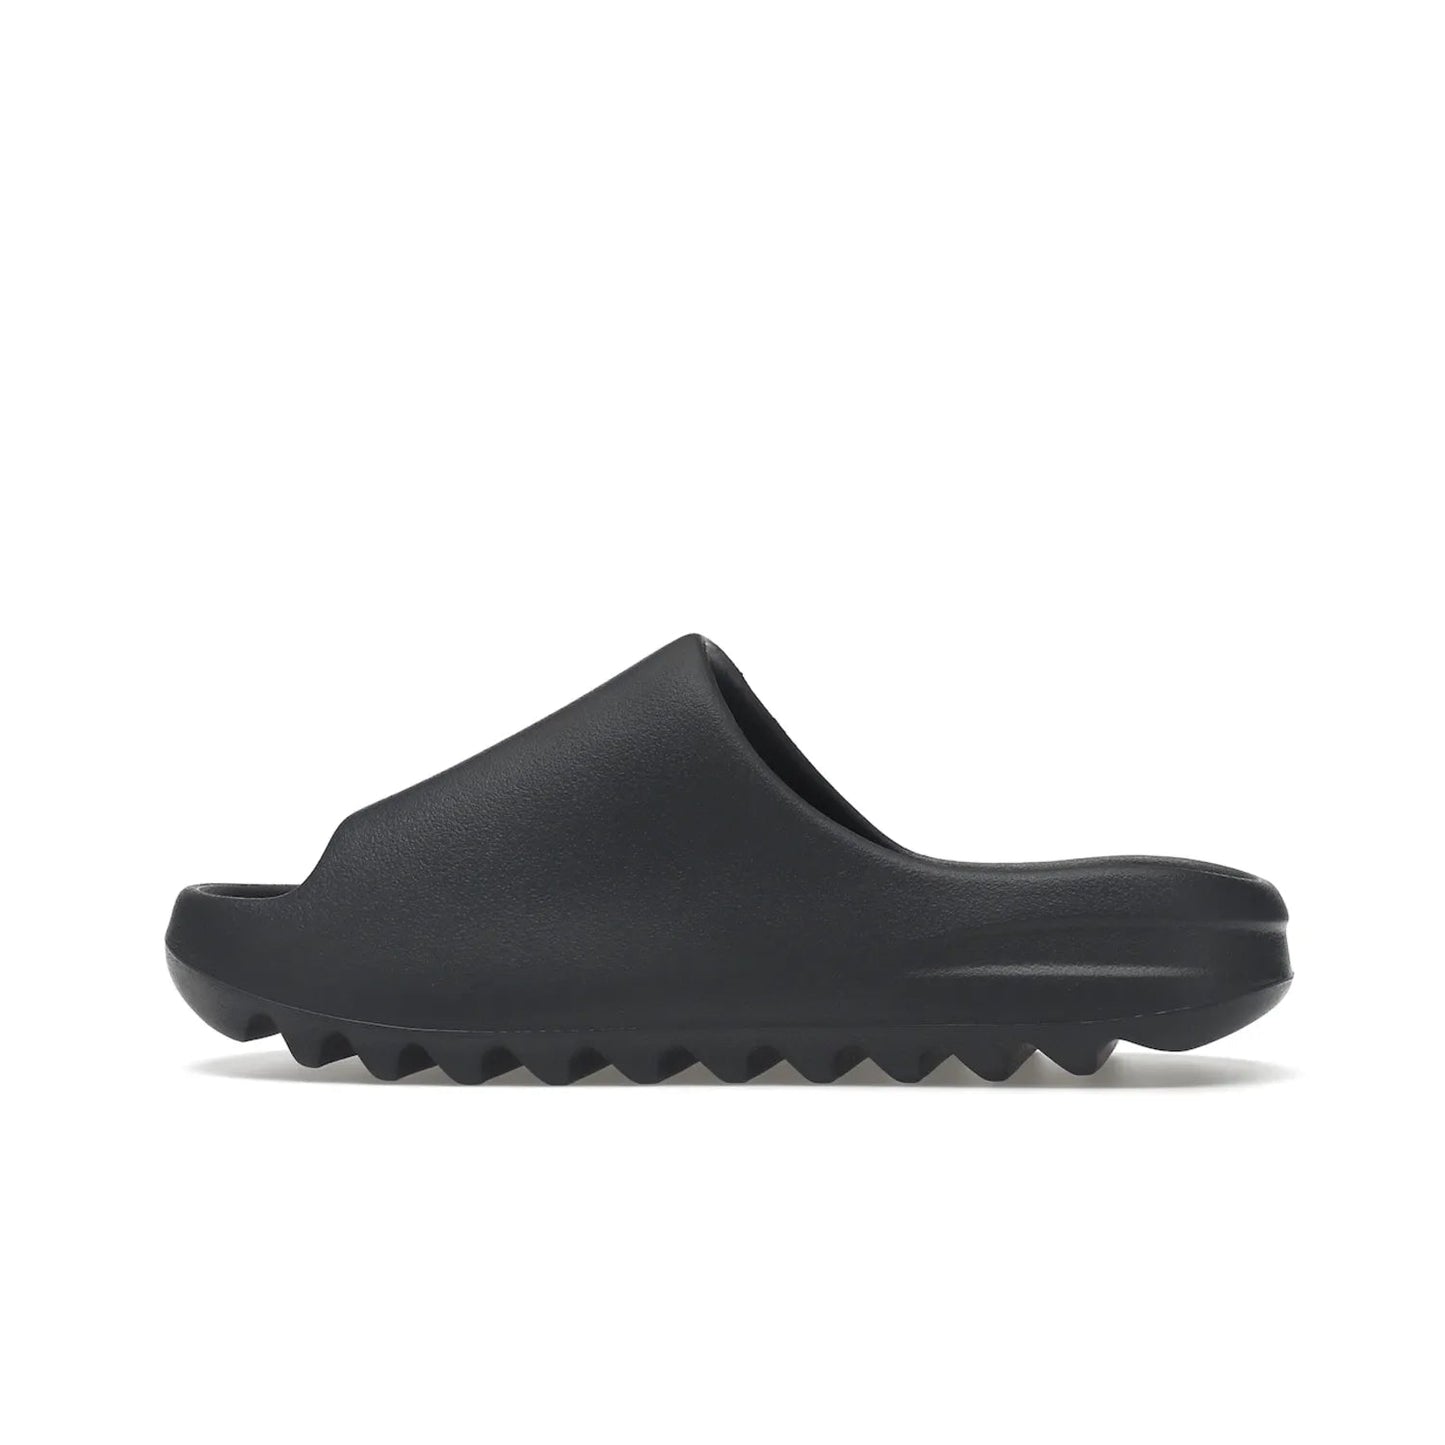 adidas Yeezy Slide Slate Grey - Image 20 - Only at www.BallersClubKickz.com - Stylish & comfortable adidas Yeezy Slide Slate Grey features an EVA foam upper, strategic cutouts, textured outsole pattern, & easy slip-on design for modern comfort & classic style.